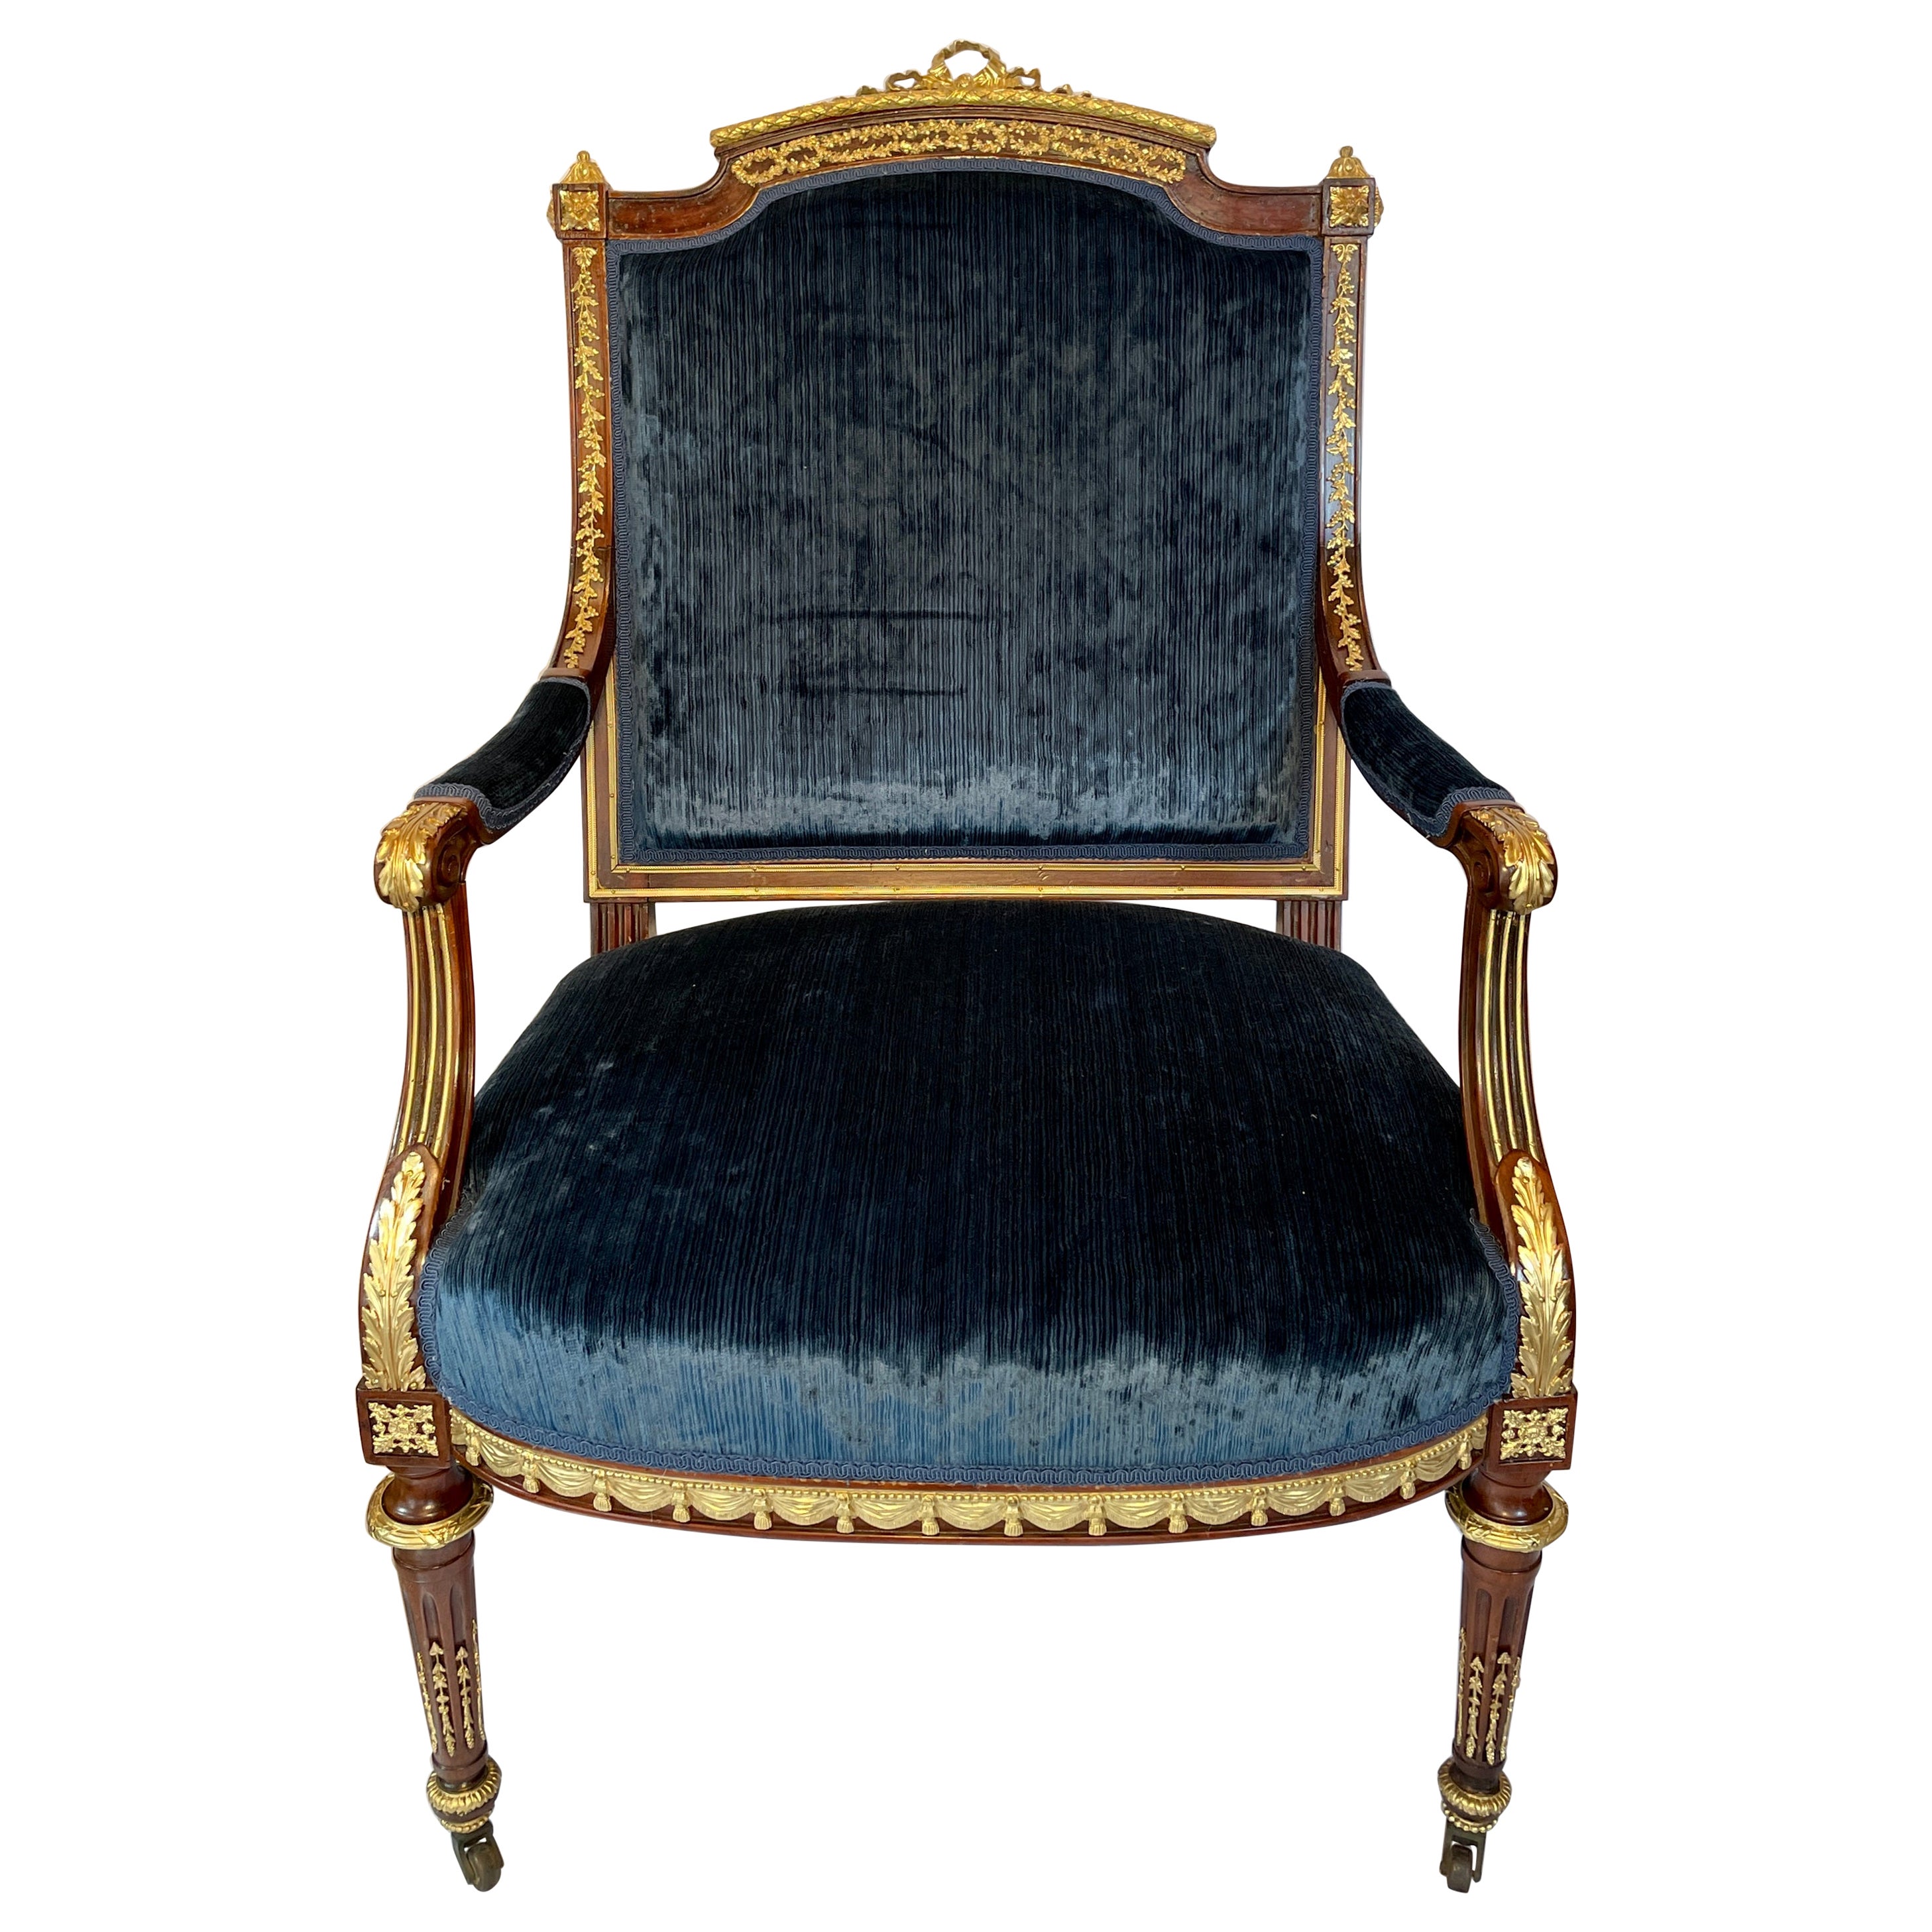 Antique French Gold Bronze & Mahogany Armchair with Delicate Trim, circa 1875 For Sale